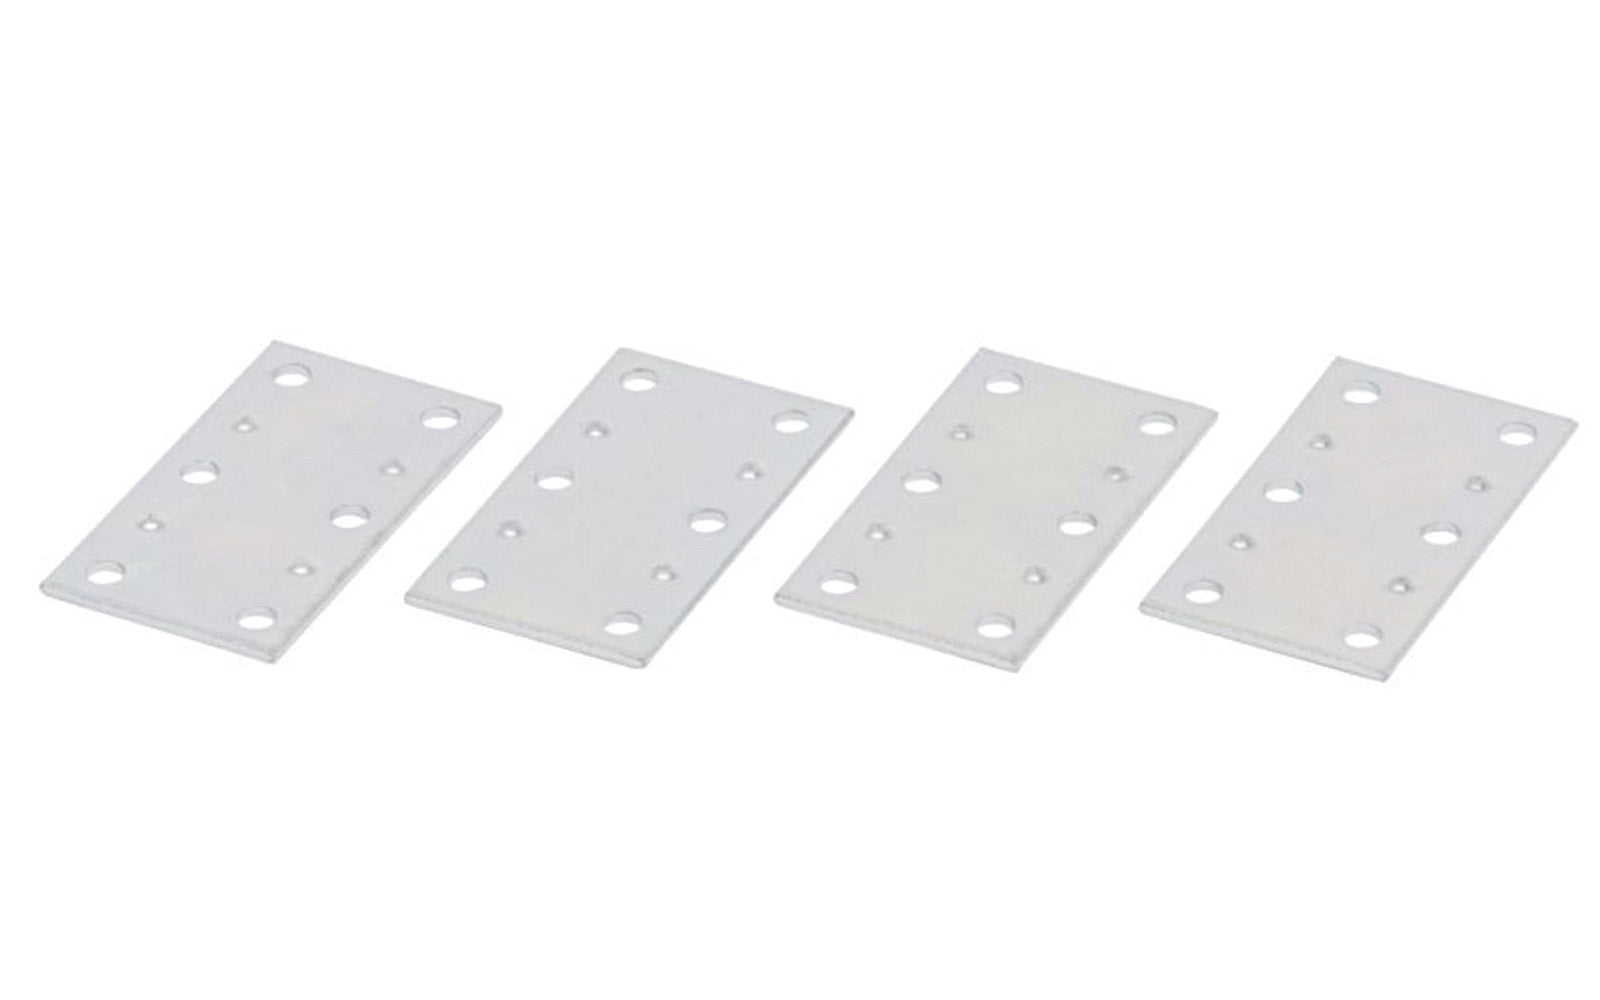 These 2-1/2" x 1-3/8" zinc plated mending plates are for reinforcing, attaching, connecting & splicing panels & industrial applications. Made of steel material with a zinc plating. 4 Pack. National Hardware Model N220-103. 038613220102. Plated to withstand weather conditions & prevent corrosion. 